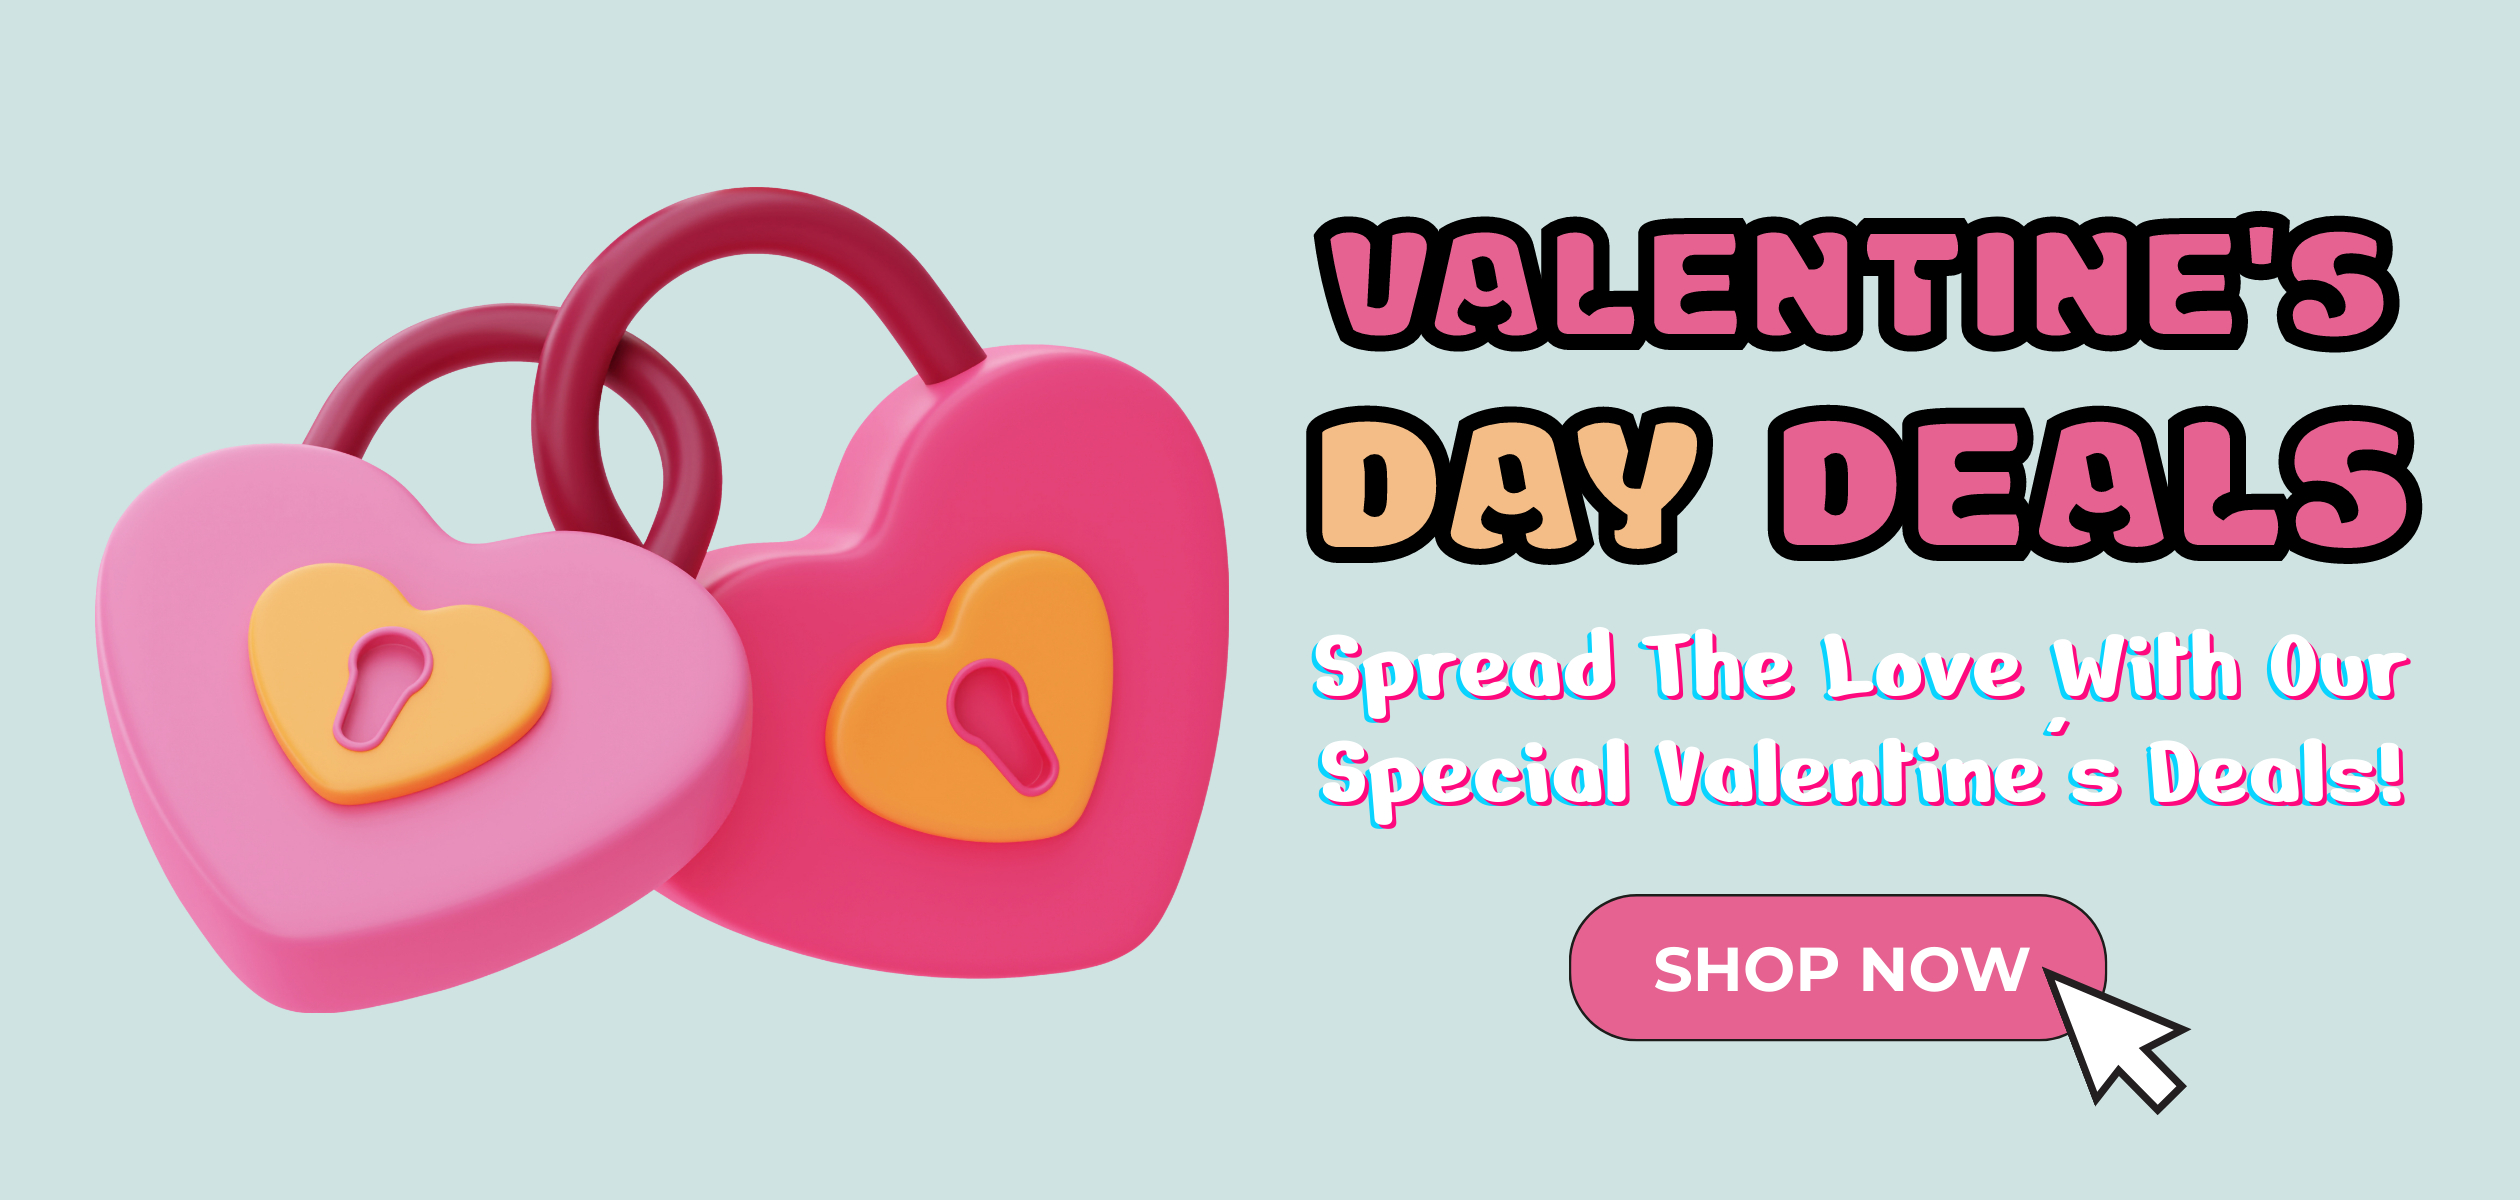 Valentine's Day Deals and Gifts